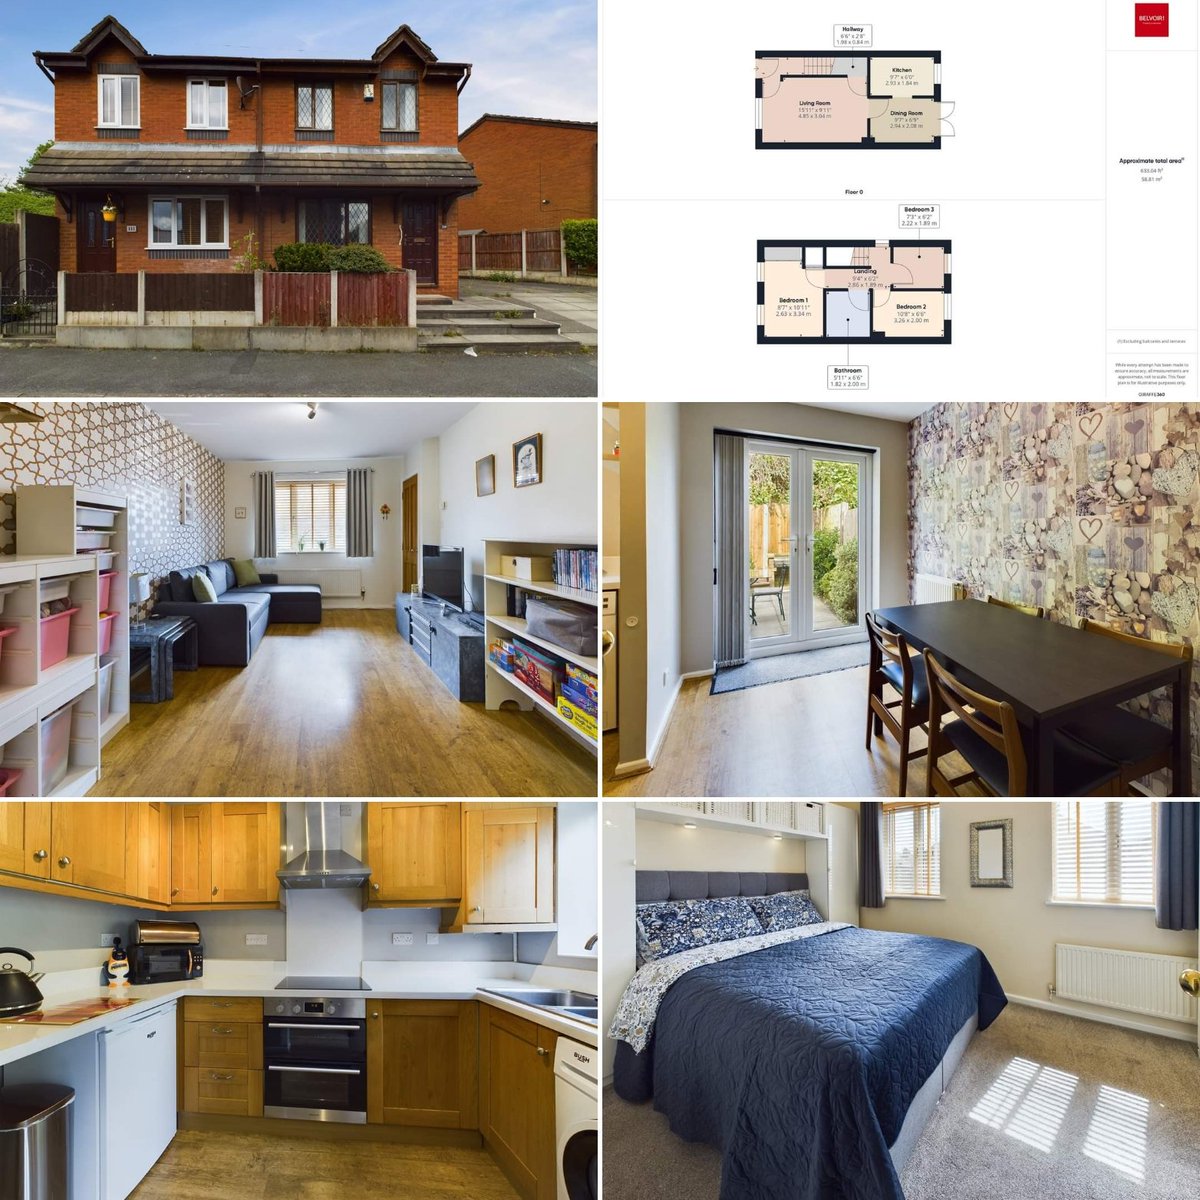 ✨✨✨New SALES Instruction✨✨✨ Fitzherbert Street, Orford, Warrington, WA2 Price : £200,00 🏘 Semi Detached House 🚗 Driveway & Garage 😍 Large Garden 🛏 3 Bedrooms Contact our friendly team on : Call : 01925 636 855 Email : sales.warrington@belvoir.co.uk